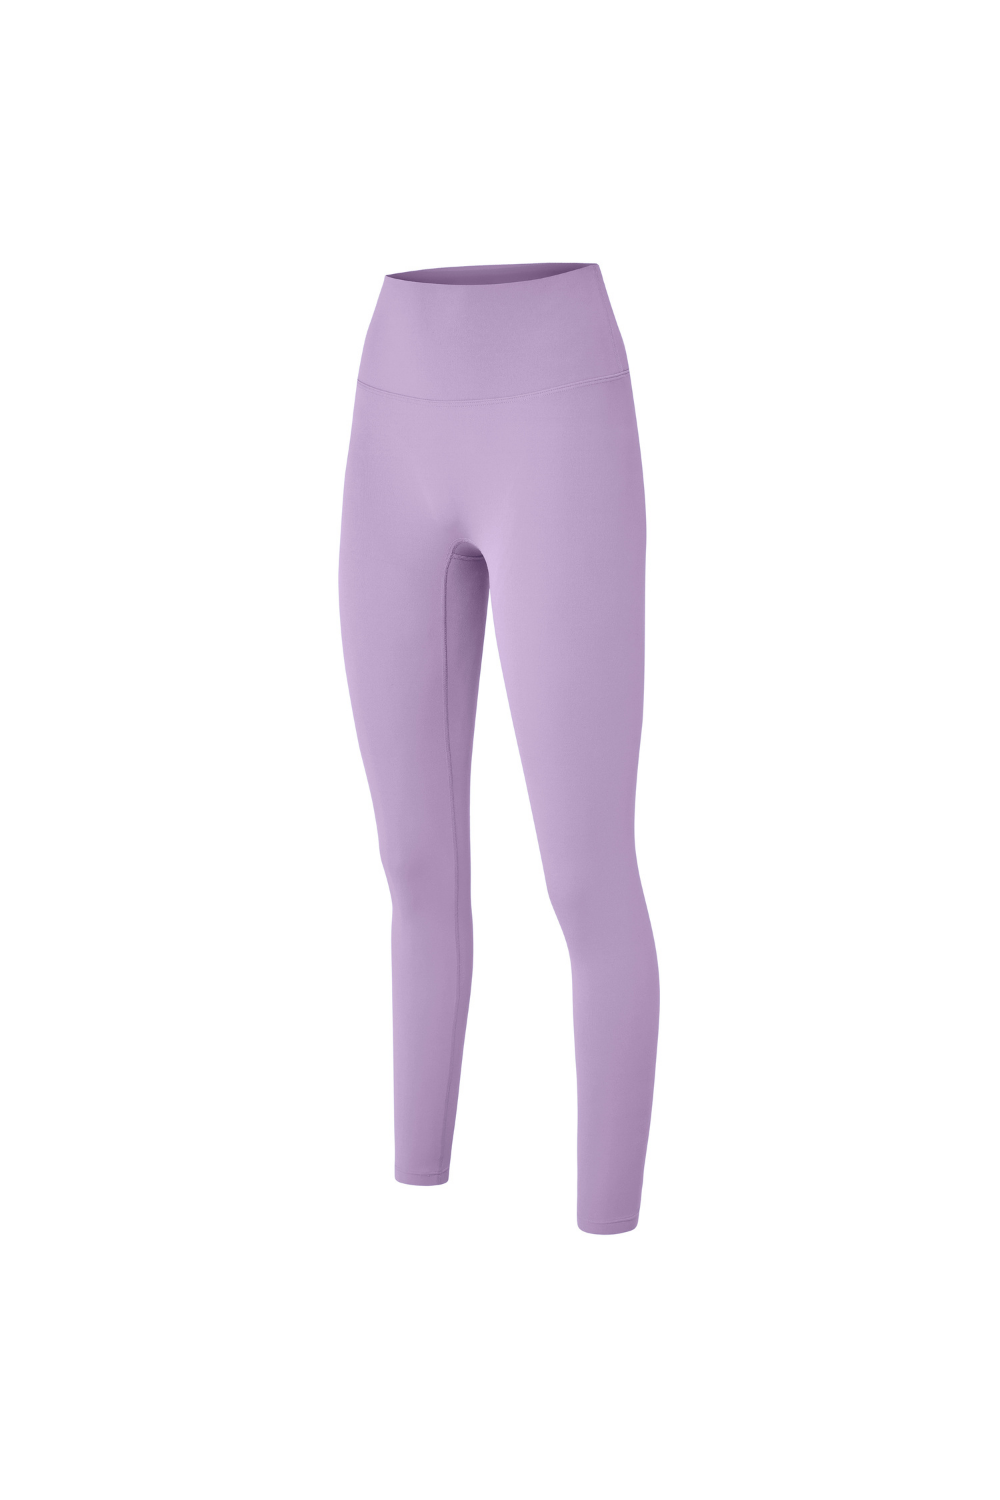 Aircooling Gini Ankle Length Legging